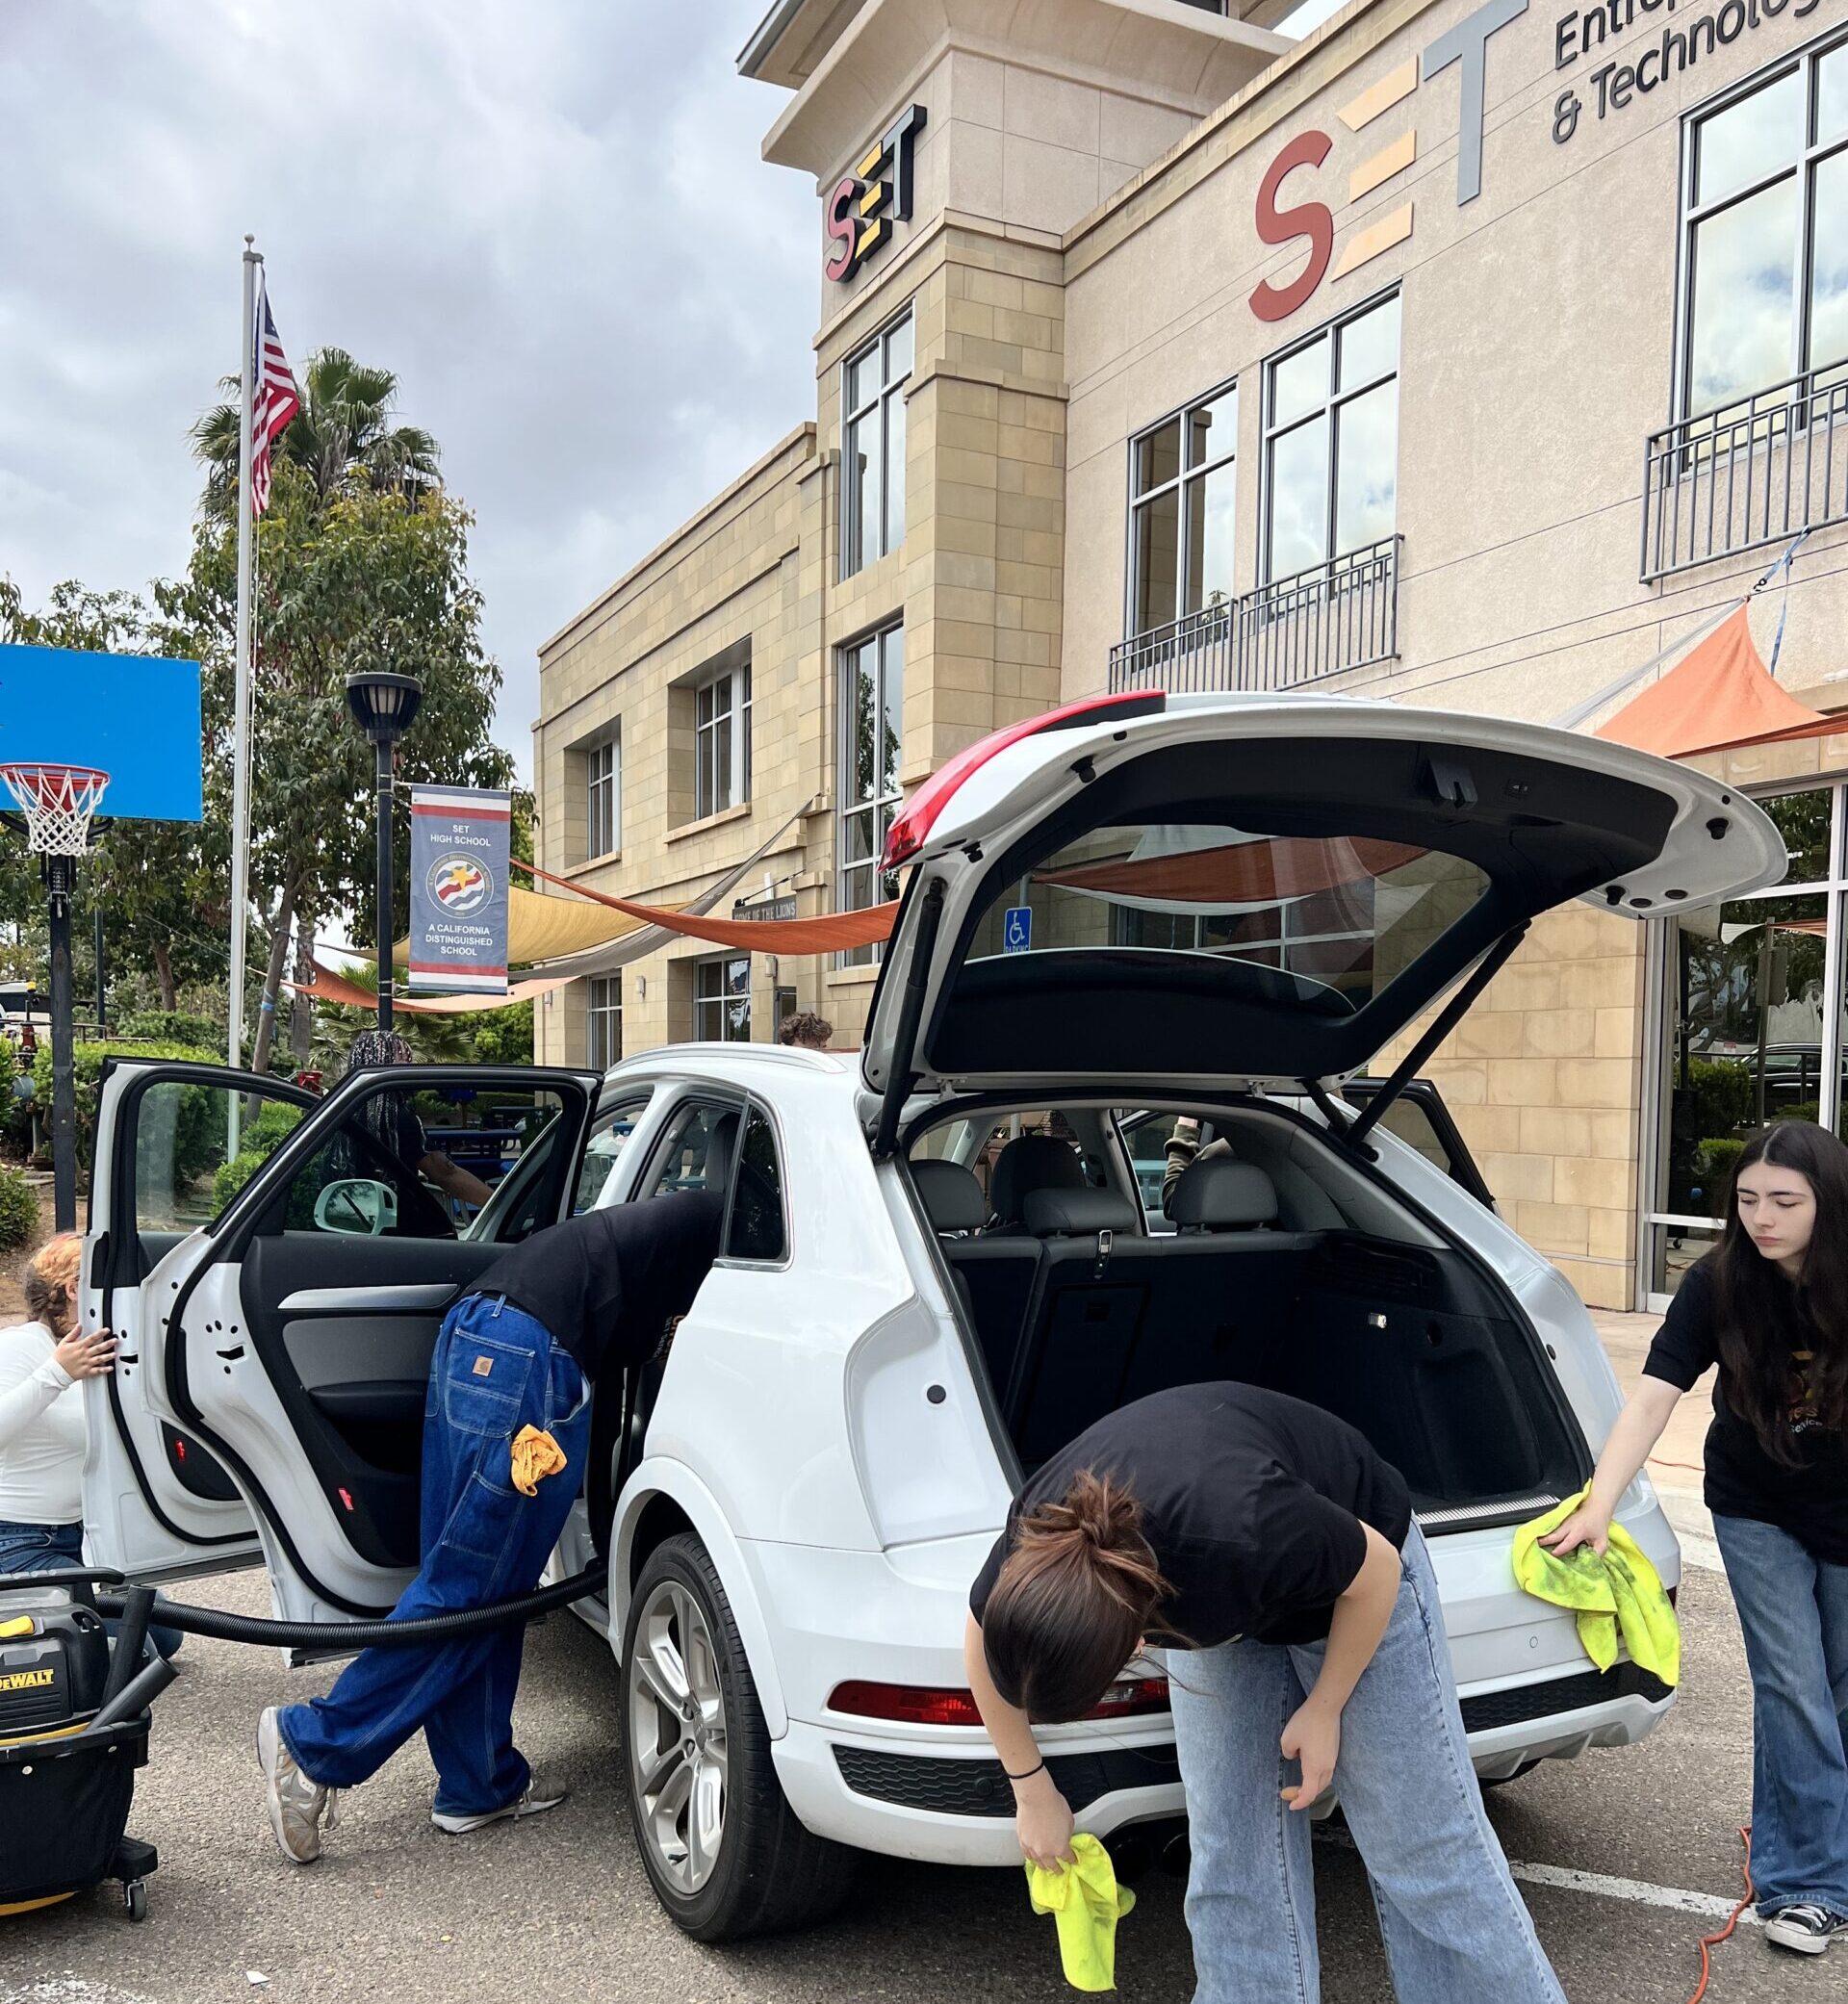 The School for Entrepreneurship & Technology students vacuum and wipe down a white car outside the school’s two story building